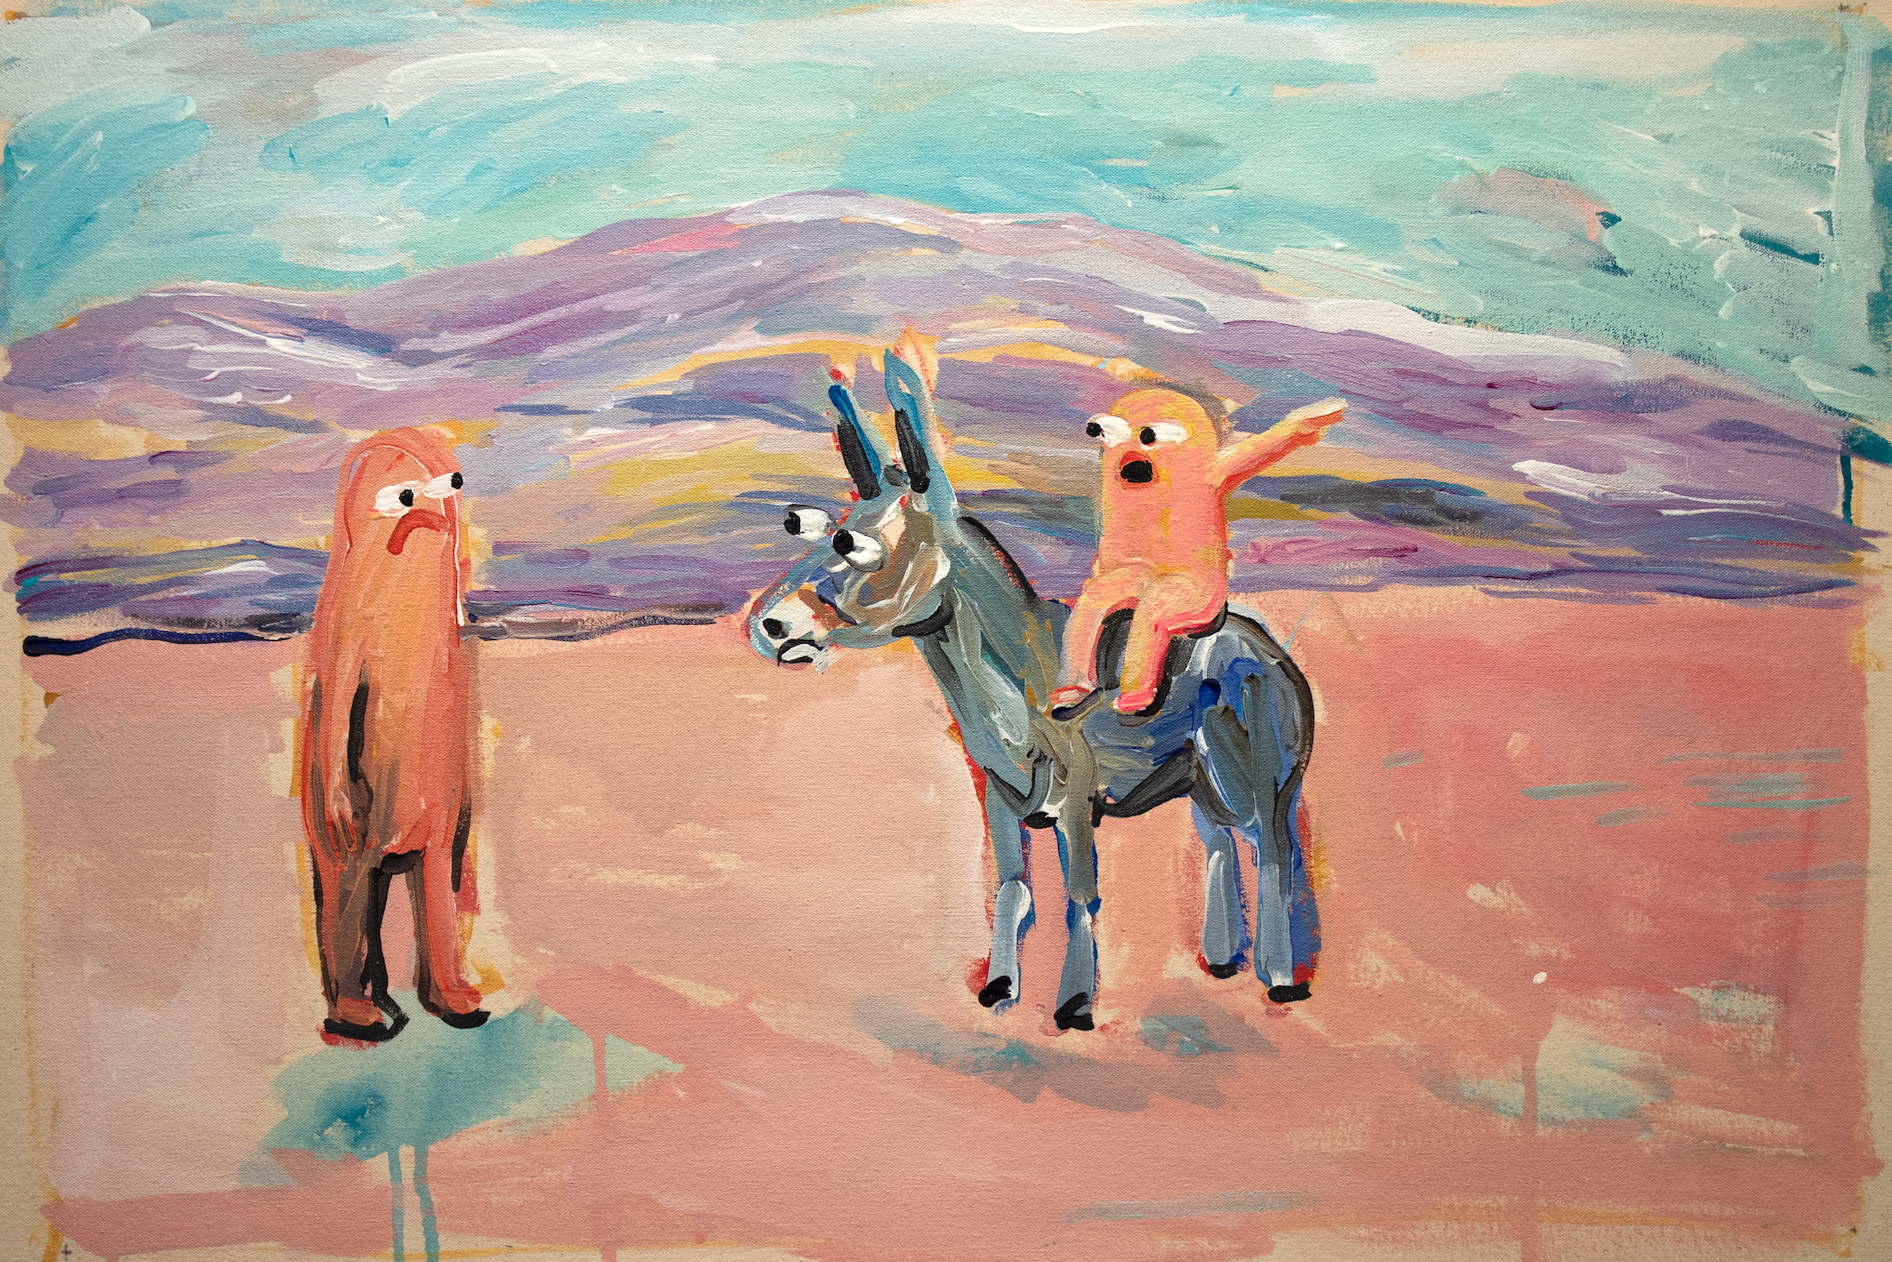 Acrylic on canvas depicts frowning pink humanoid facing smaller pink humanoid mounted on back of a donkey and pointing into distance; purple mountains and turquoise sky are in background